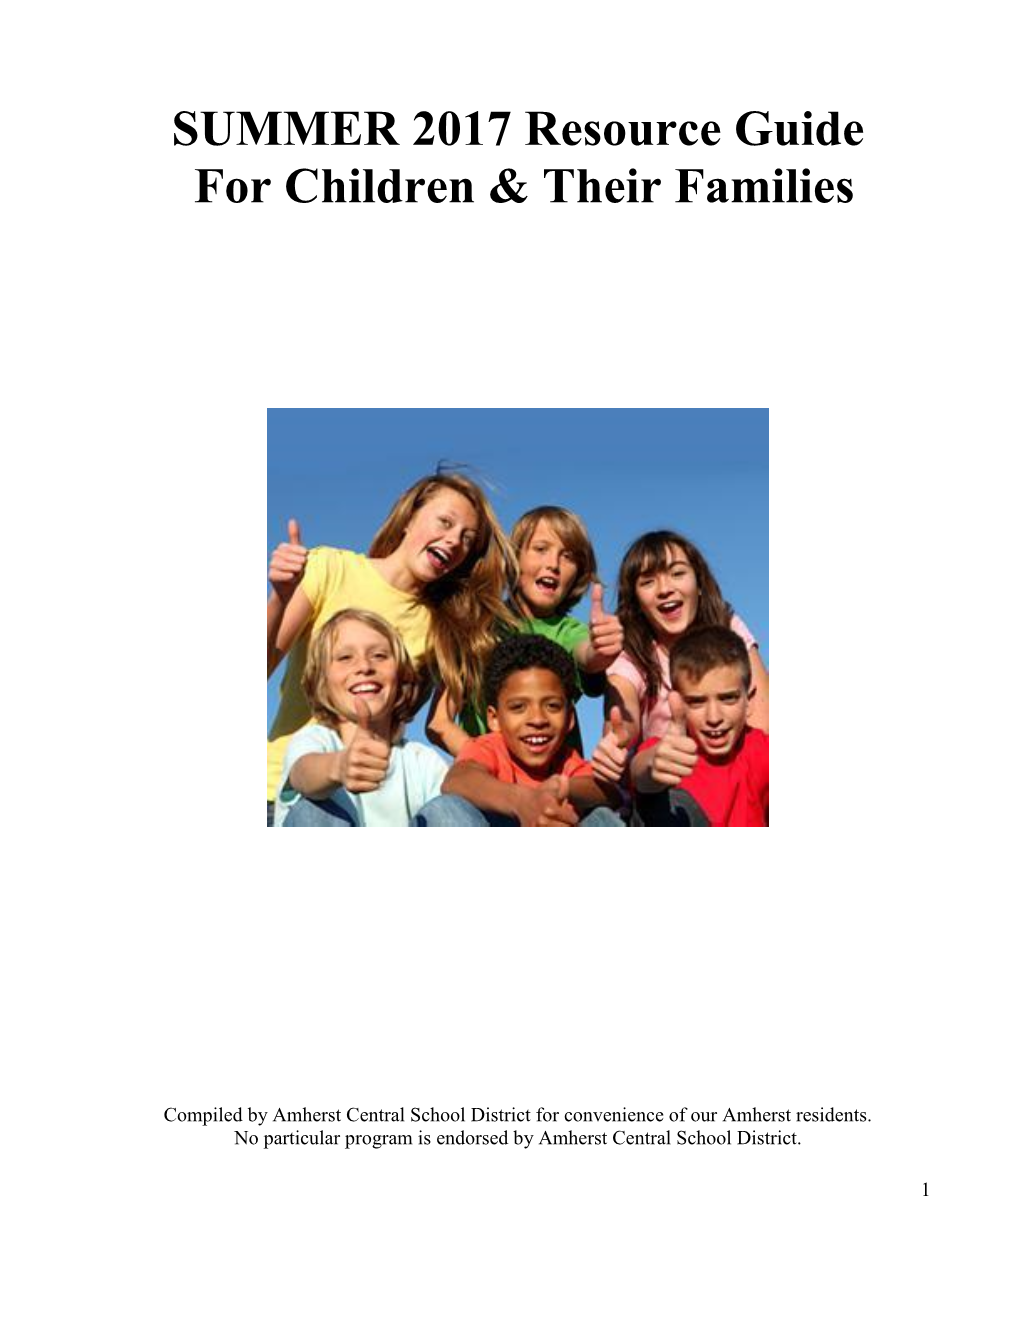 SUMMER 2017 Resource Guide for Children & Their Families